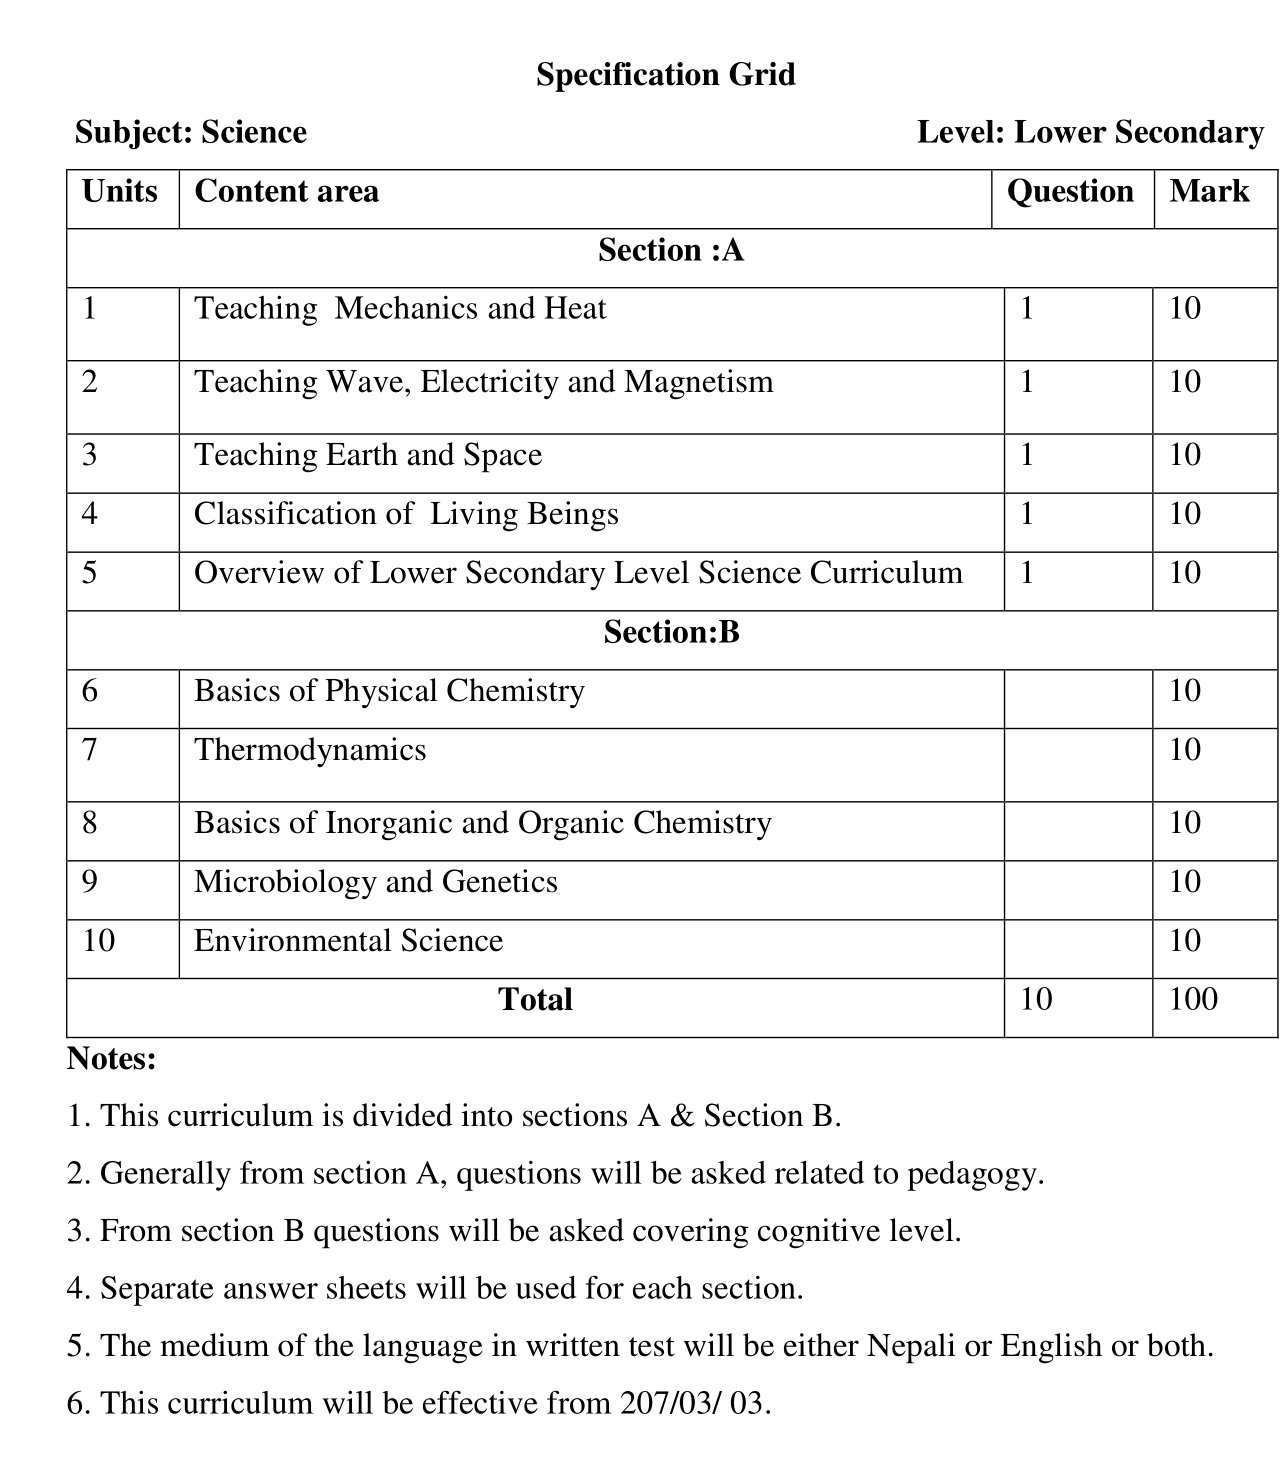 Shikshak Sewa Aayog Curriculum of Lower Secondary Level Science Subject:- We will put the Shikshak Sewa Aayog lower secondary level Science Subject Exam syllabus in this post.